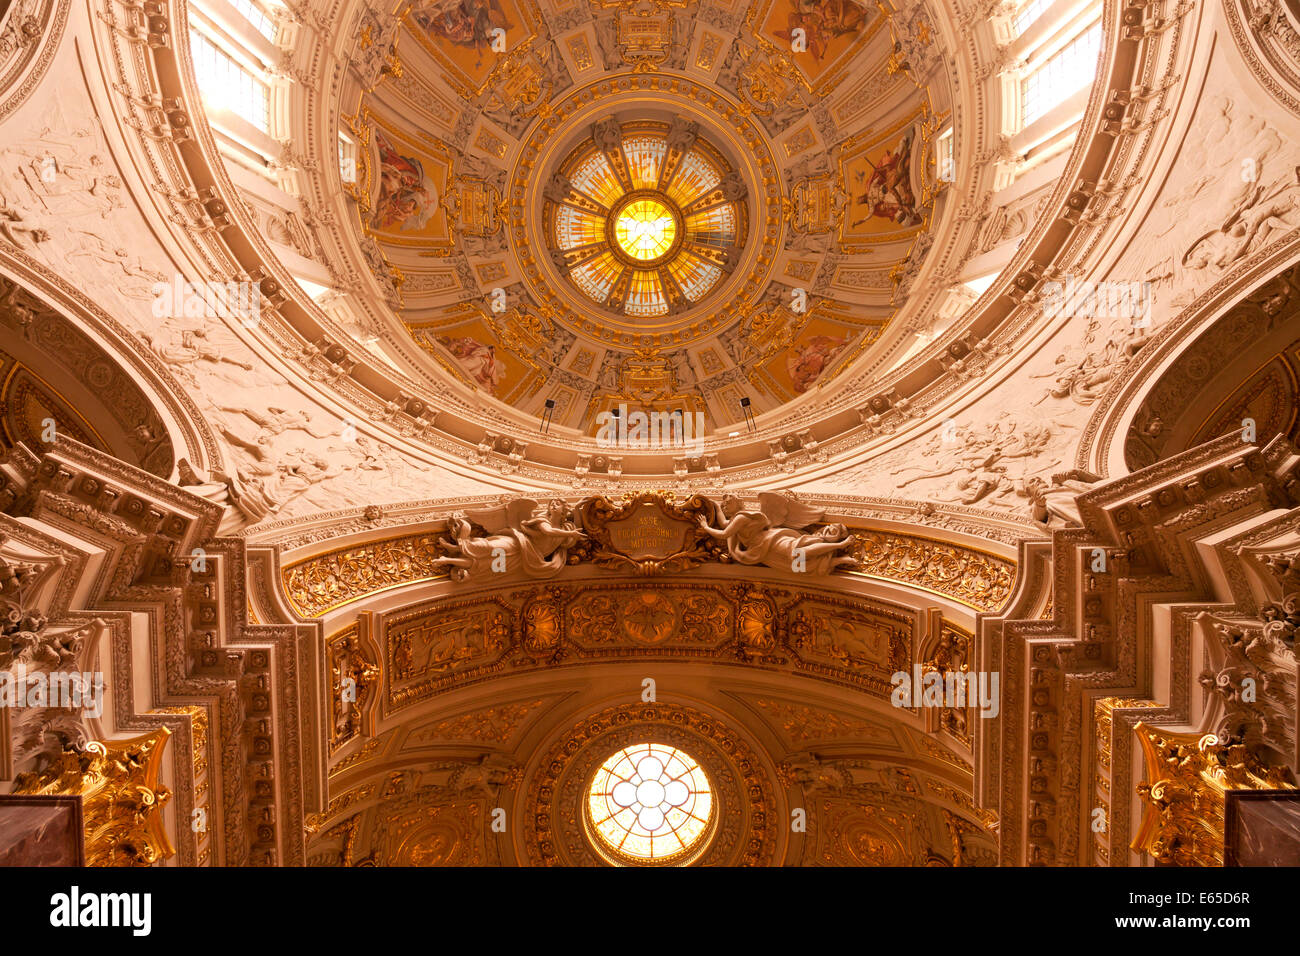 interior view and dome of the Berlin Cathedral or Dom in Berlin, Germany, Europe Stock Photo